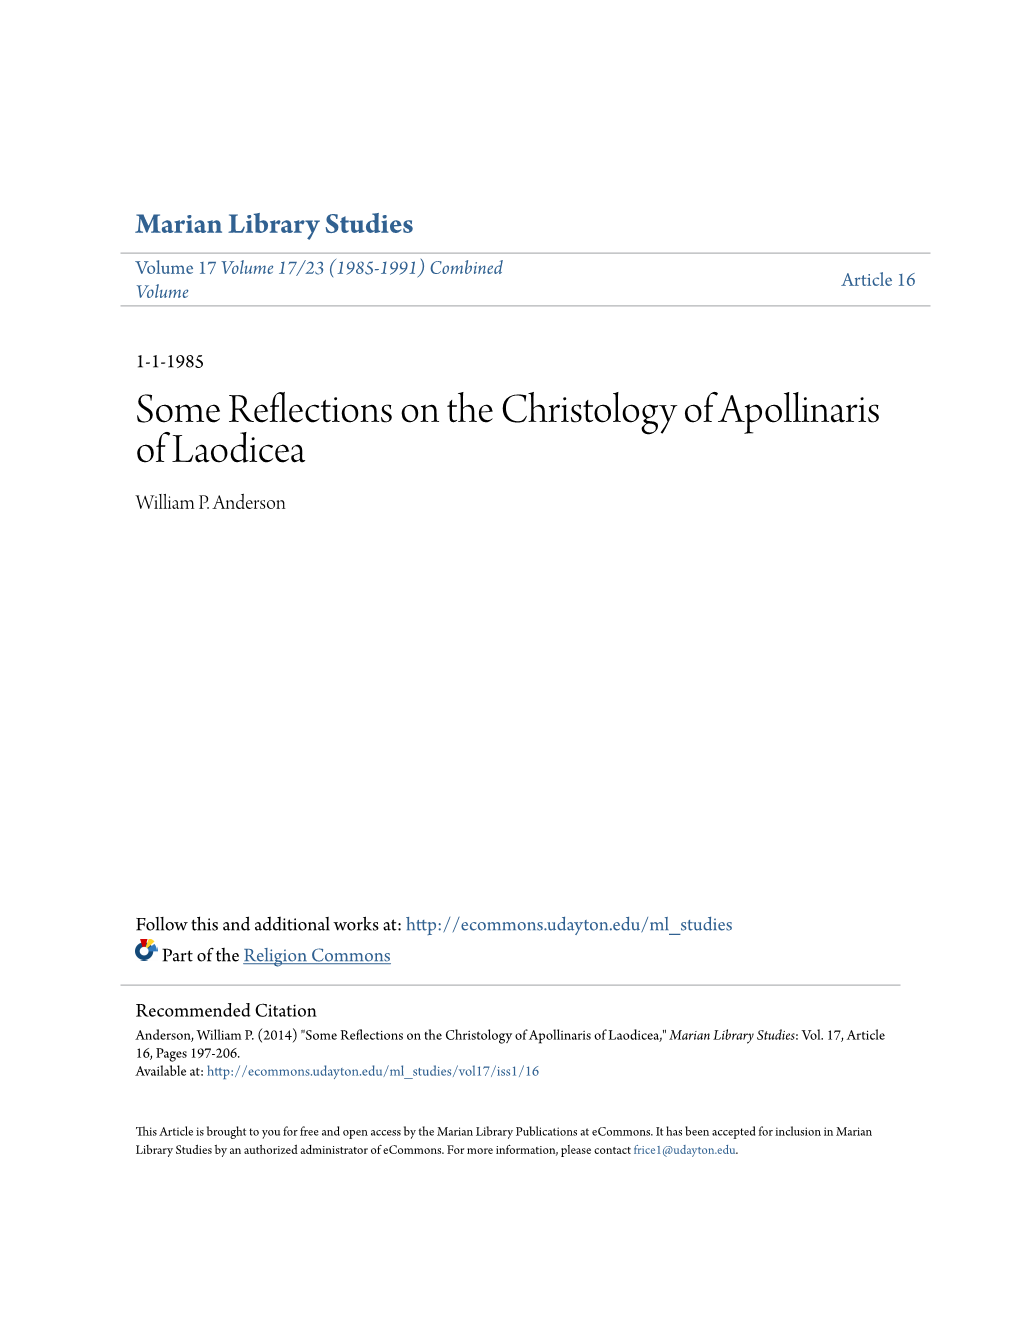 Some Reflections on the Christology of Apollinaris of Laodicea William P